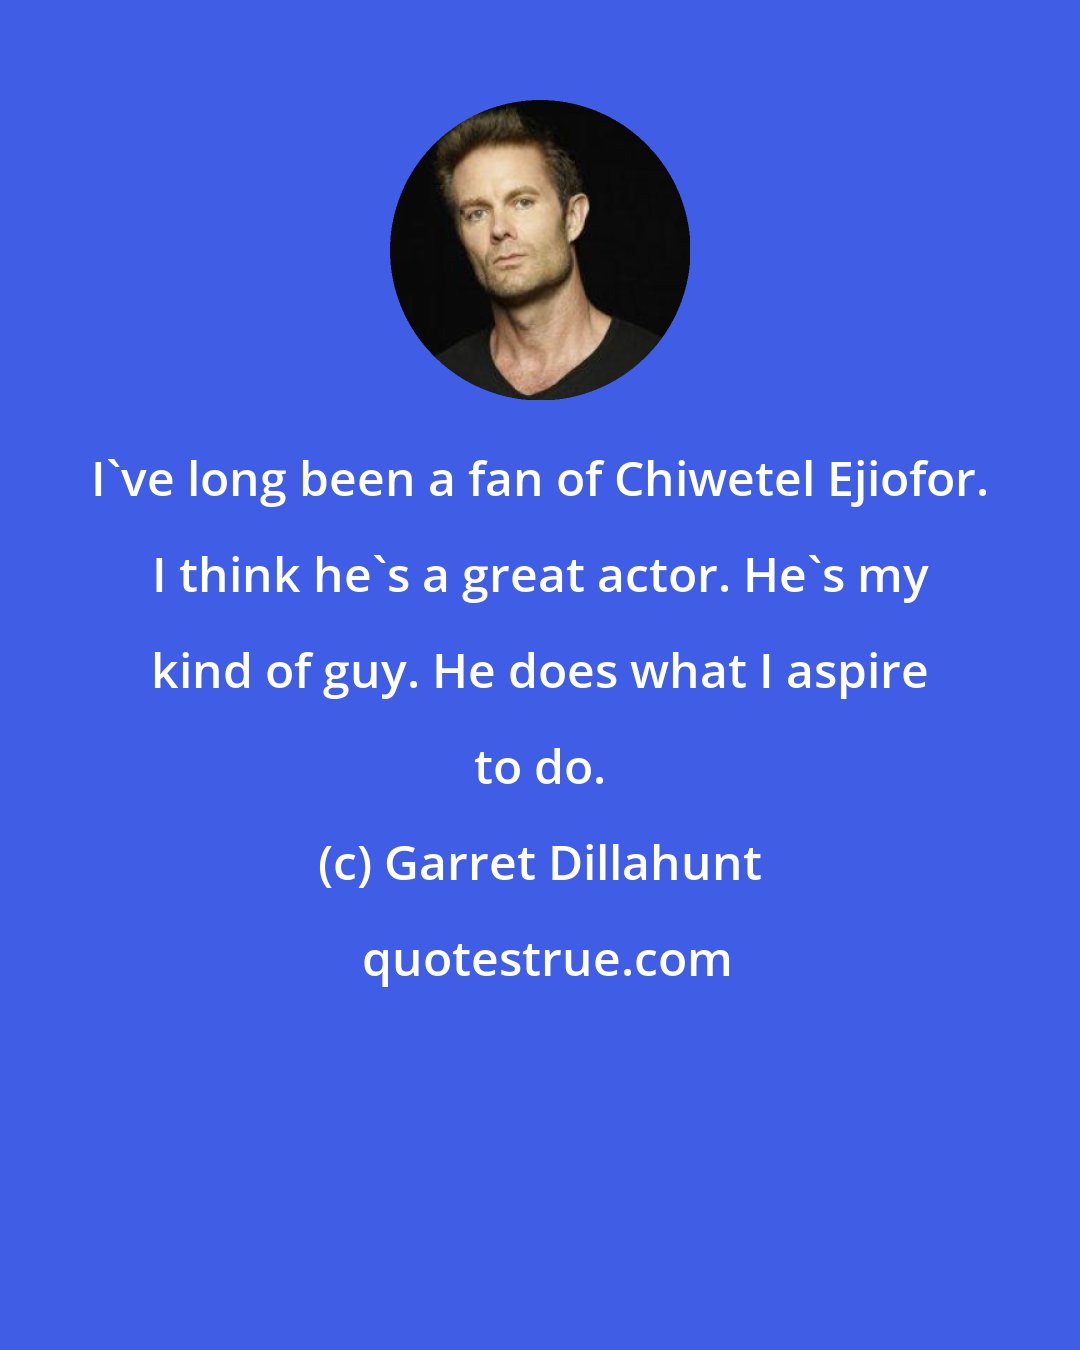 Garret Dillahunt: I've long been a fan of Chiwetel Ejiofor. I think he's a great actor. He's my kind of guy. He does what I aspire to do.